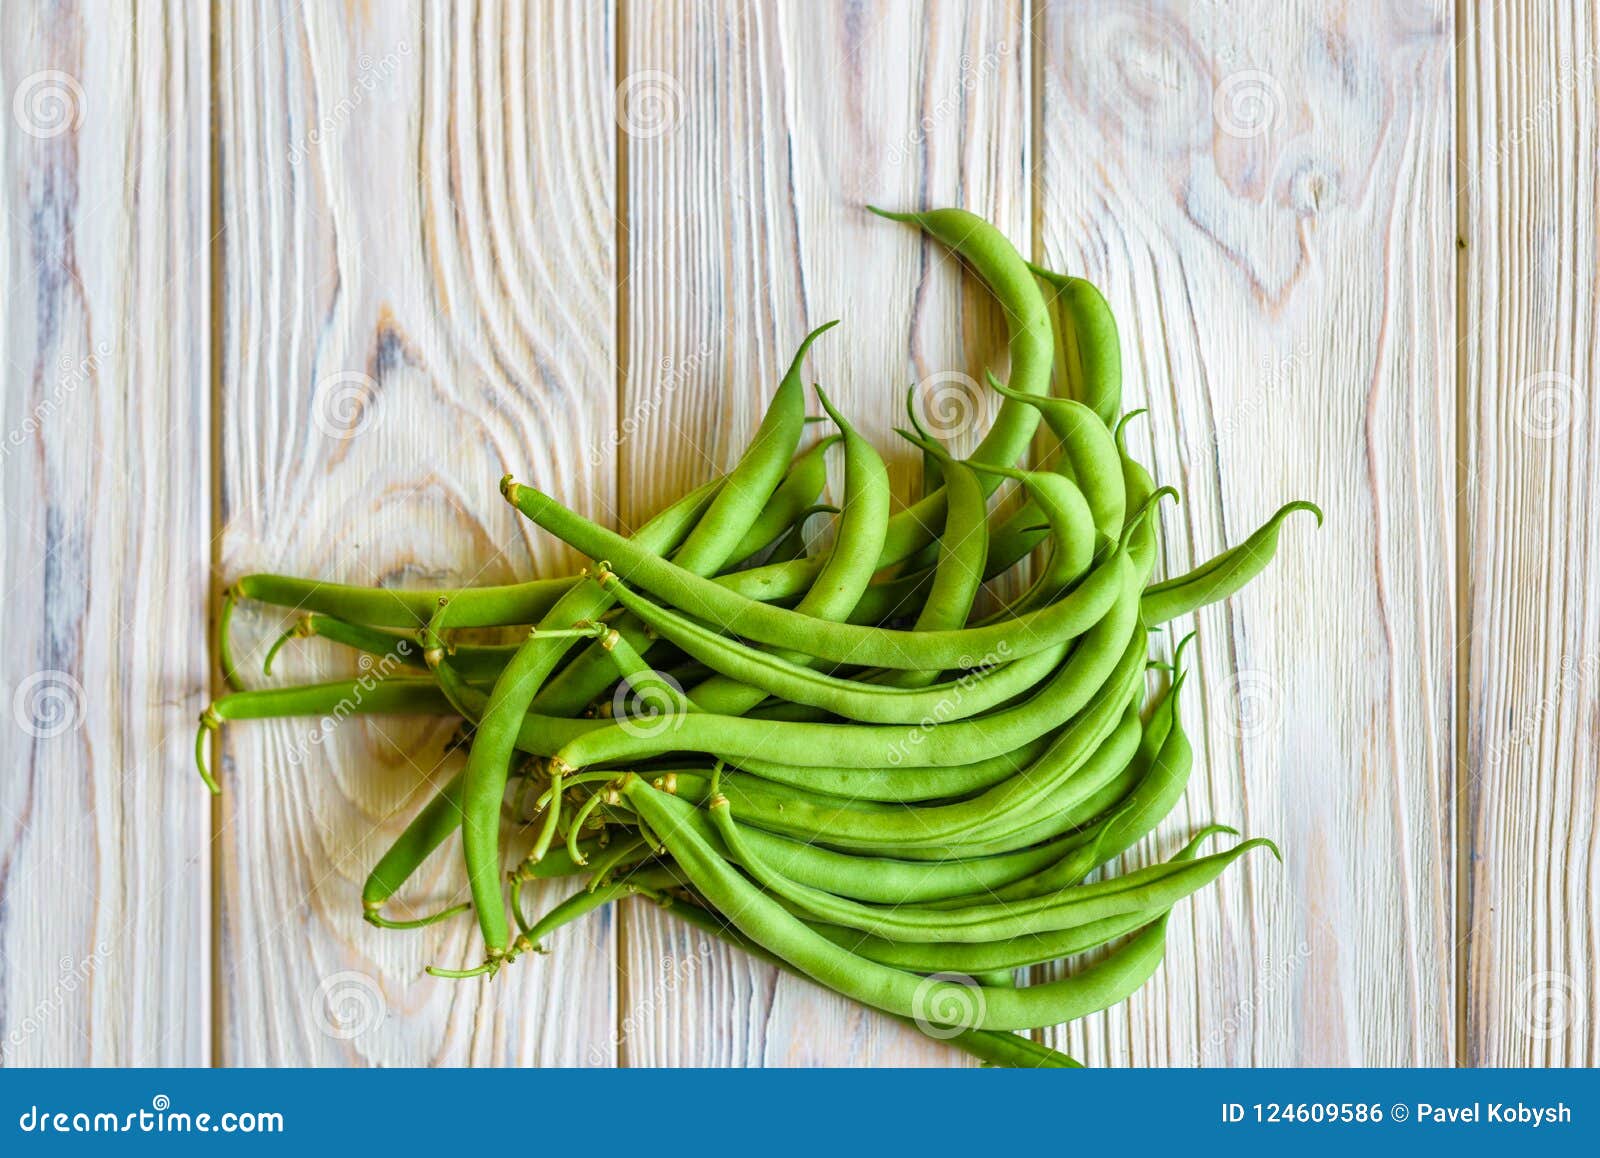 Bunch of Freshly Picked Green Beans on a Wooden Surface Stock Photo ...